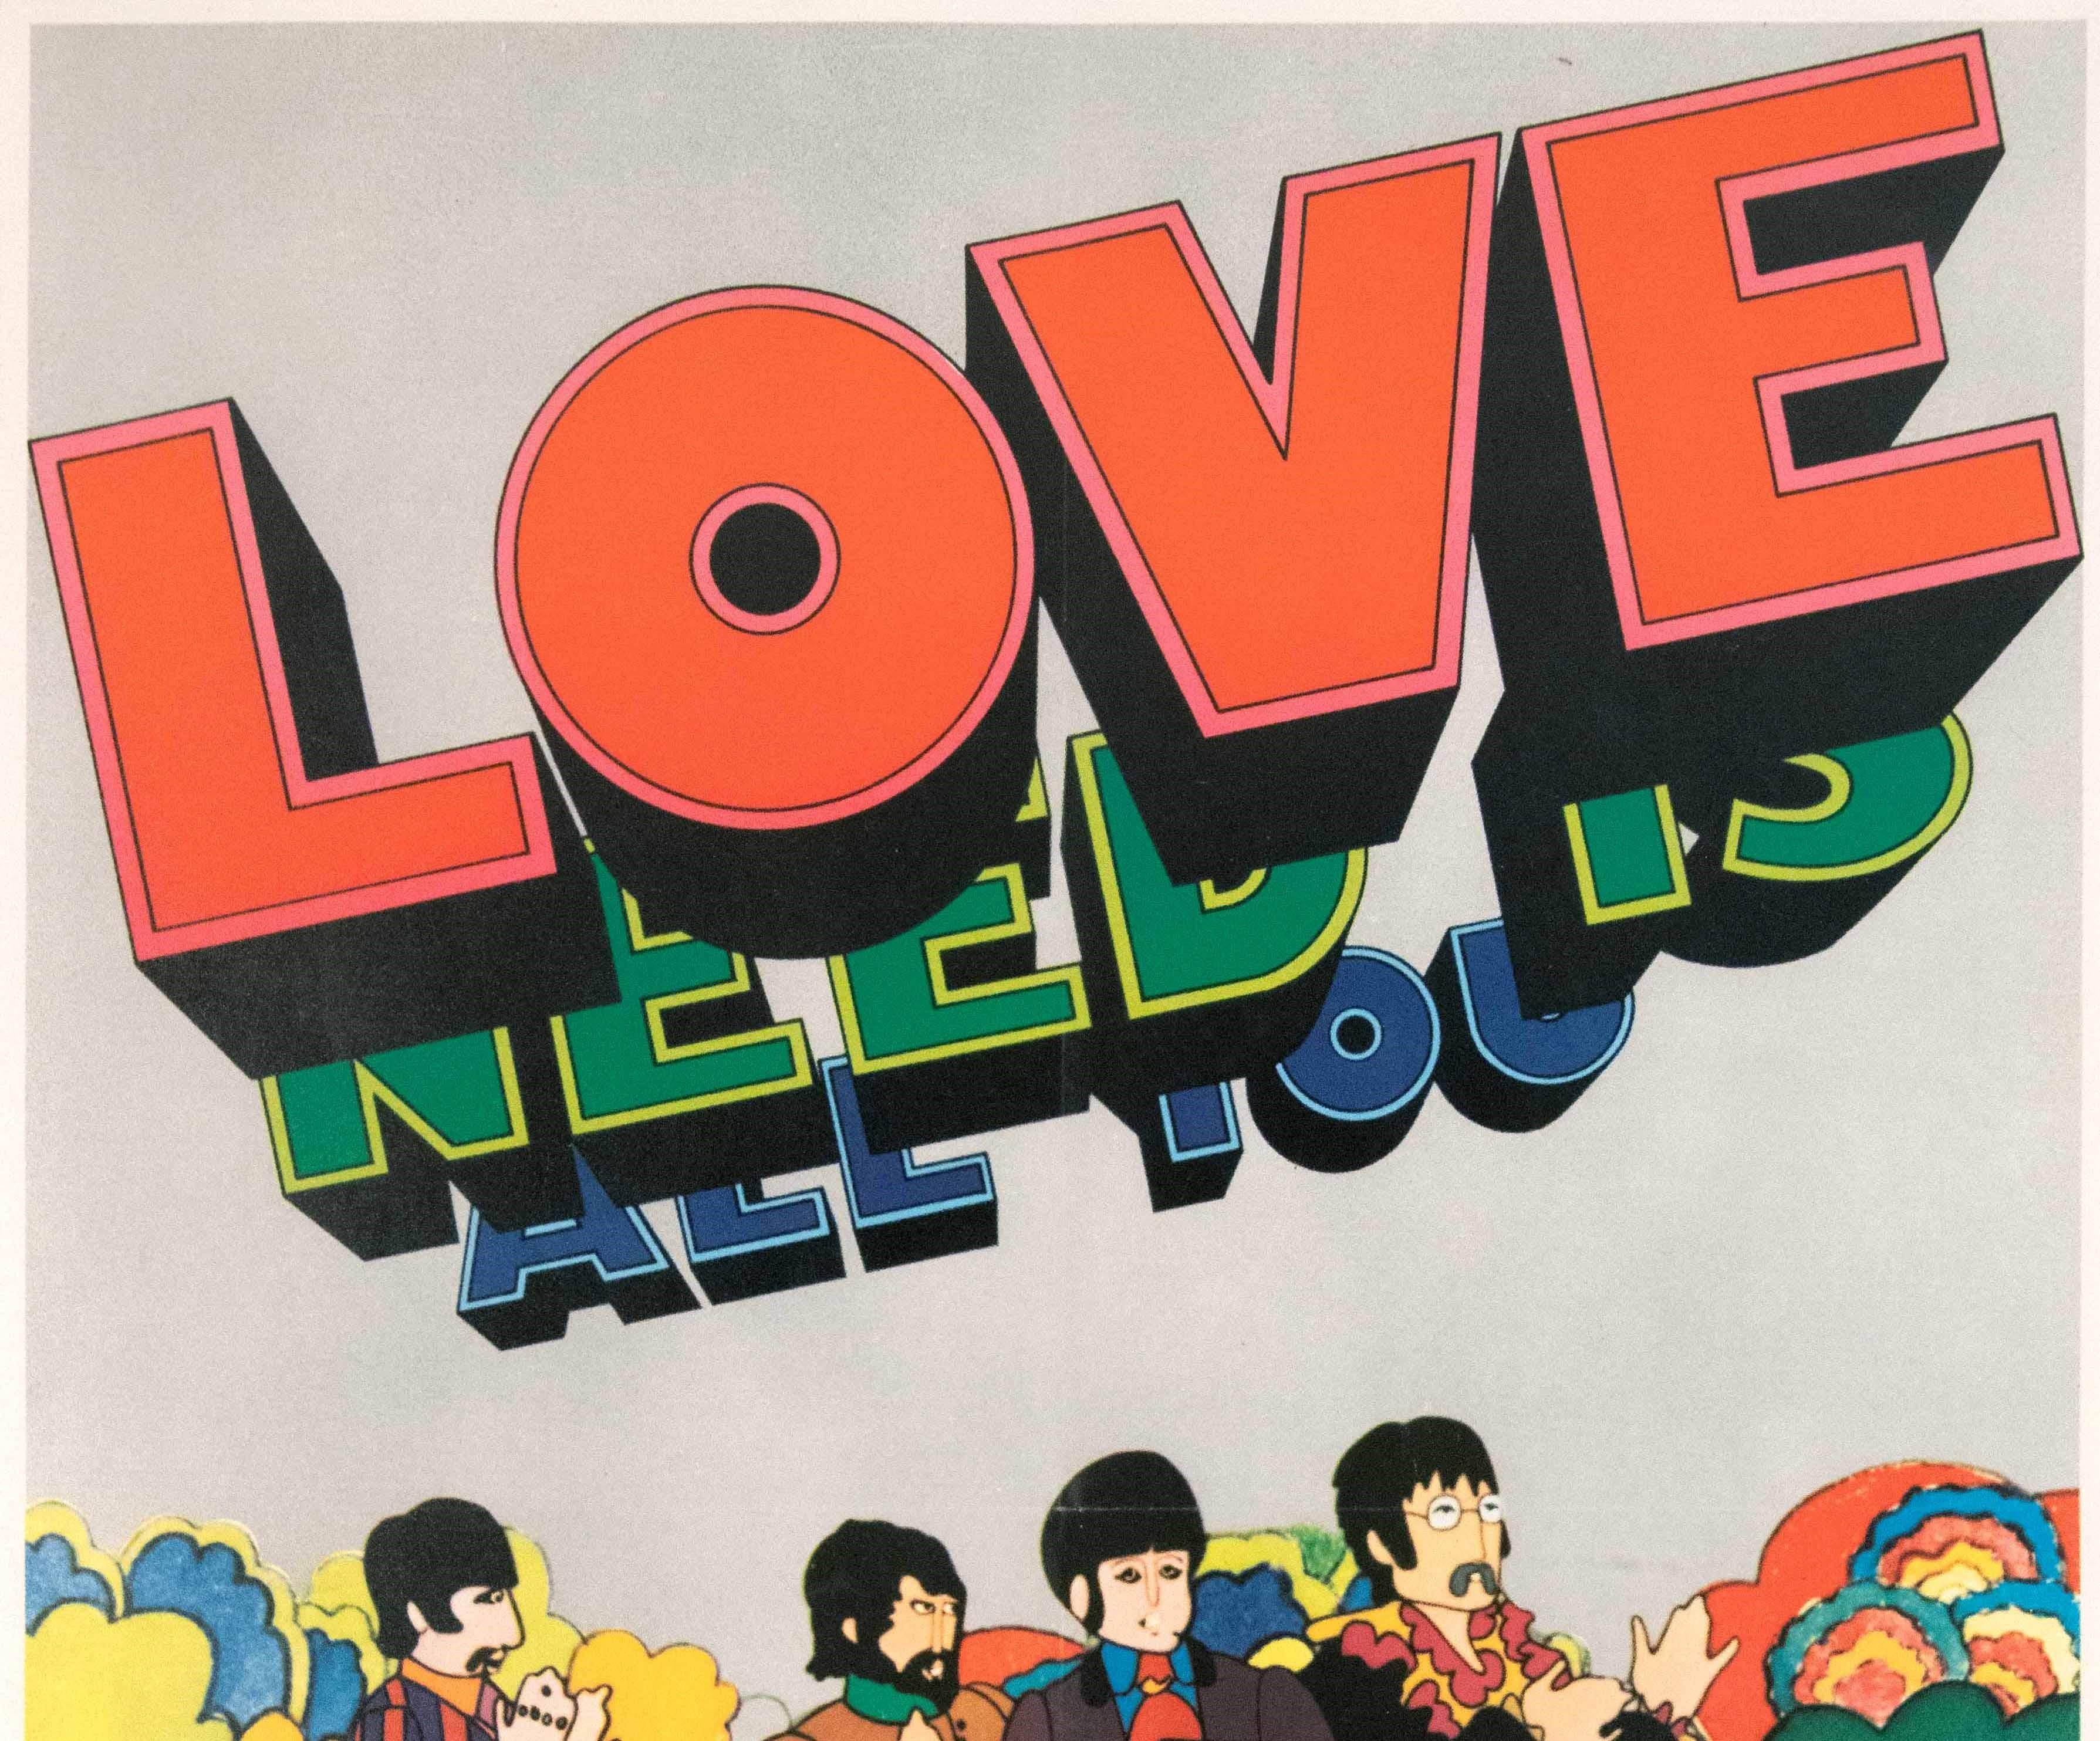 Original vintage advertising poster issued by Shell as a tie-in with the Beatles film Yellow Submarine directed by George Dunning and featuring the music of and starring The Beatles (John Lennon, Paul McCartney, George Harrison and Ringo Starr).